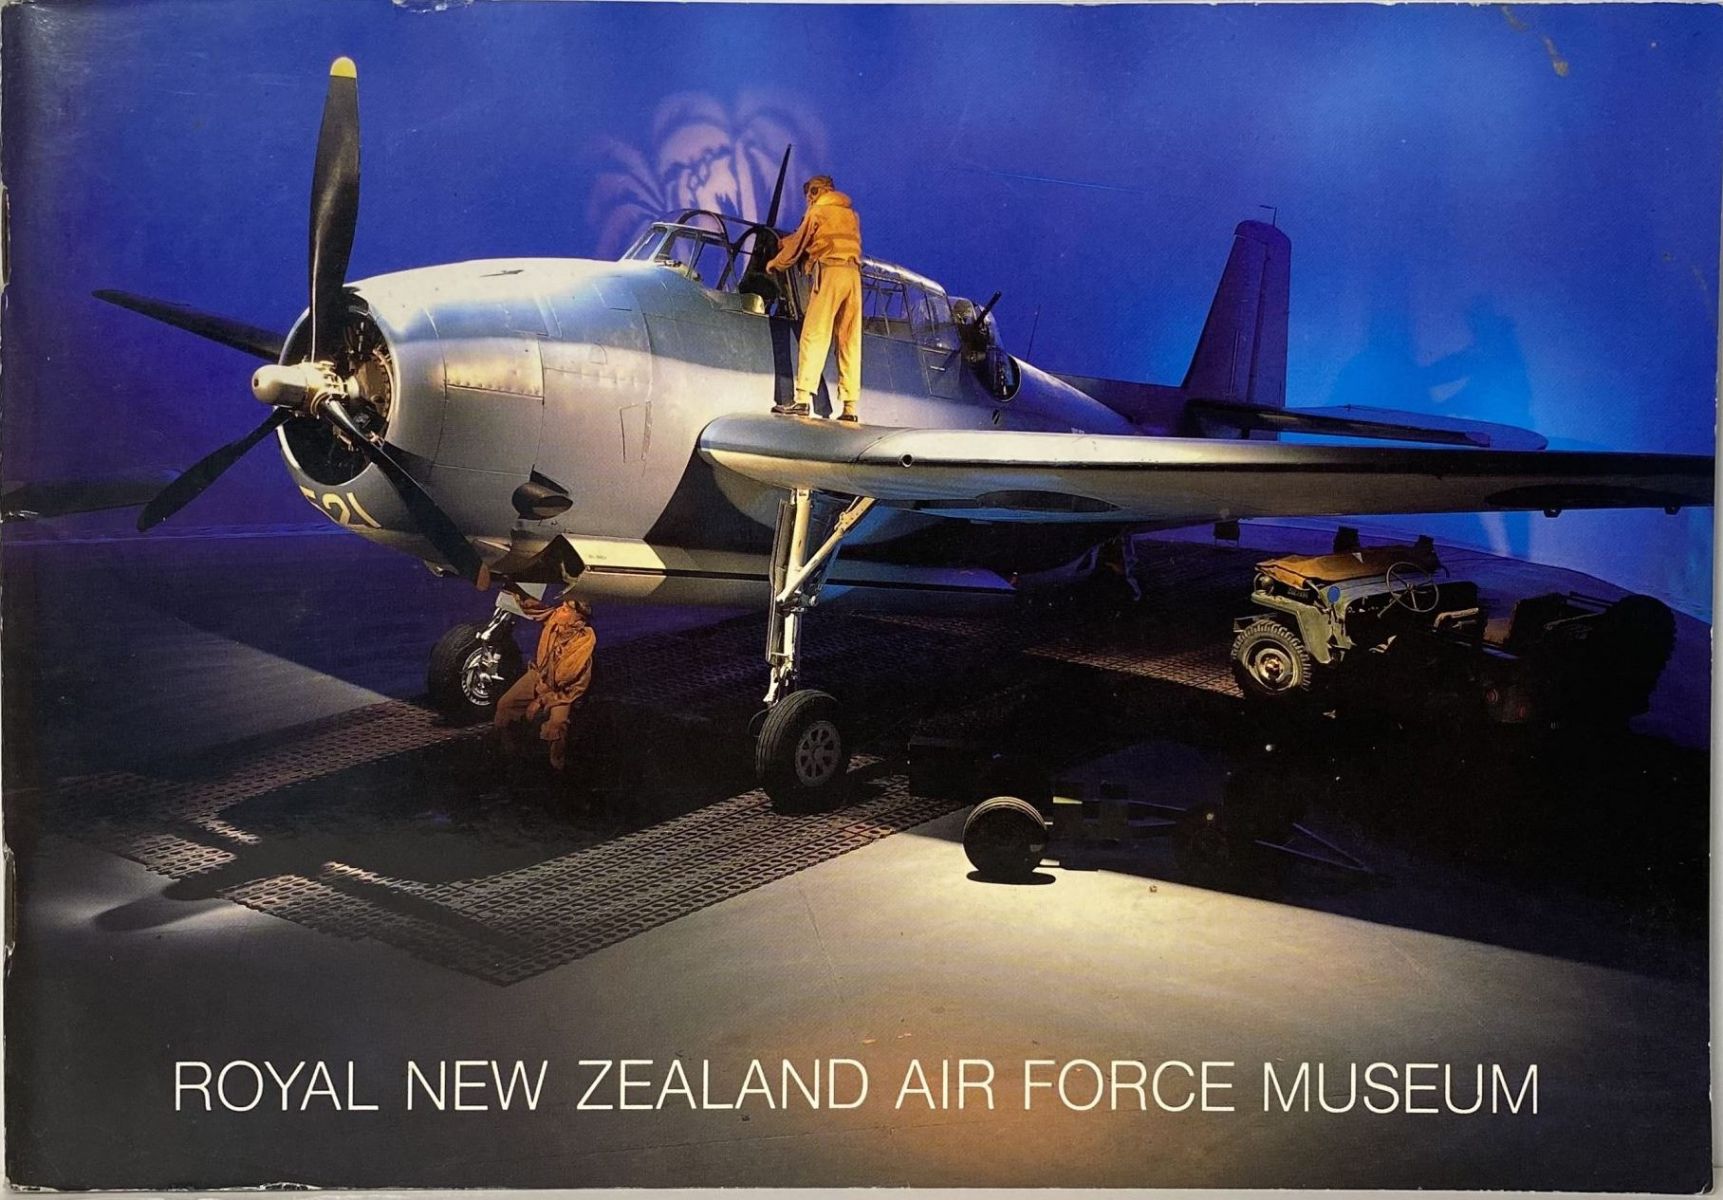 Royal New Zealand Air Force Museum